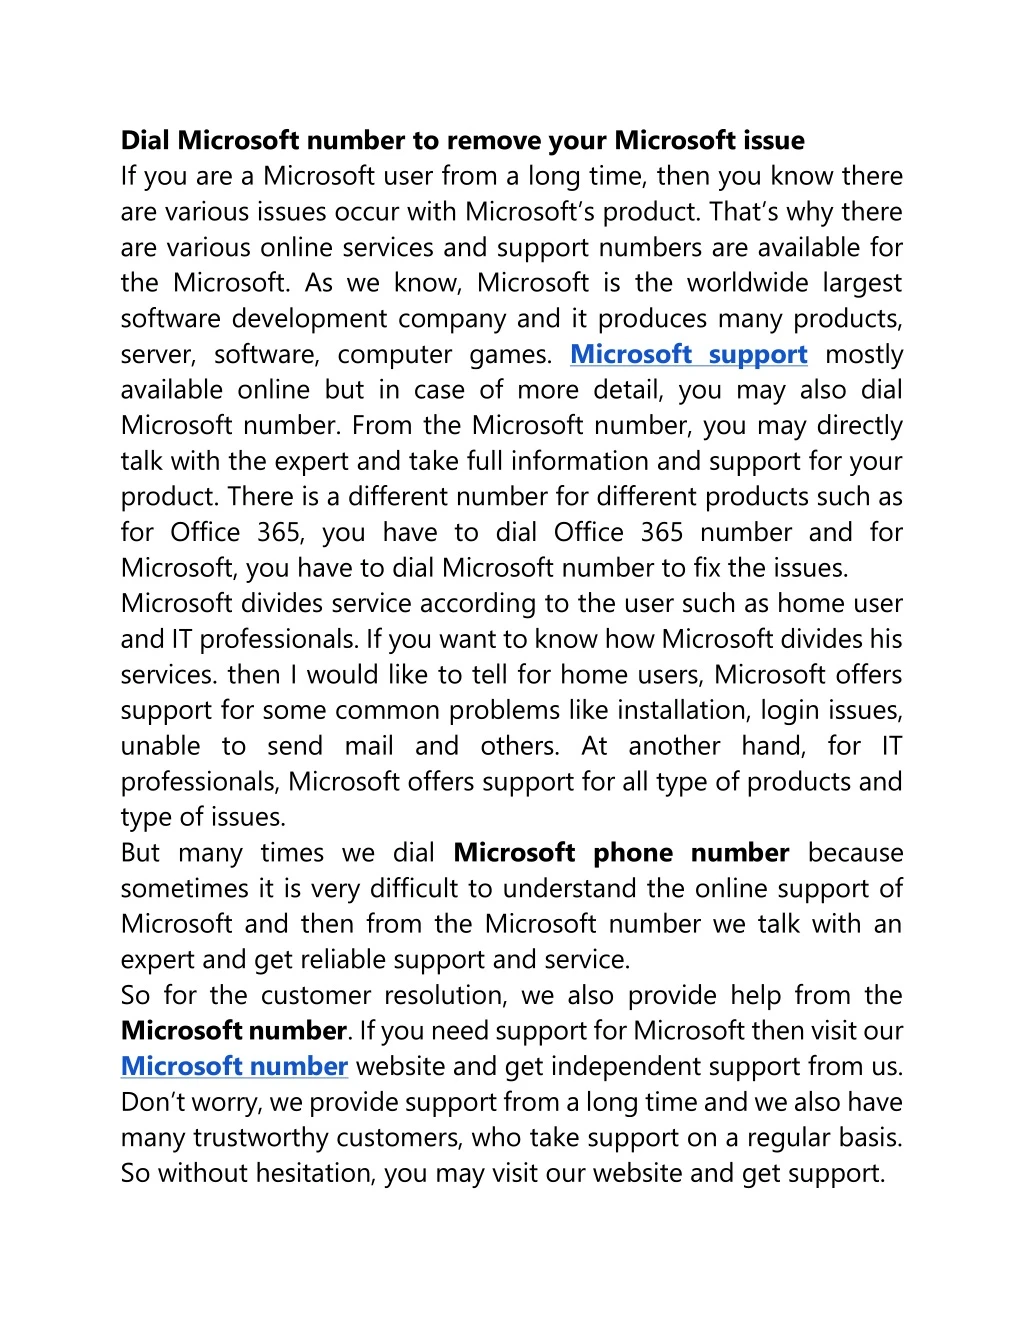 dial microsoft number to remove your microsoft n.